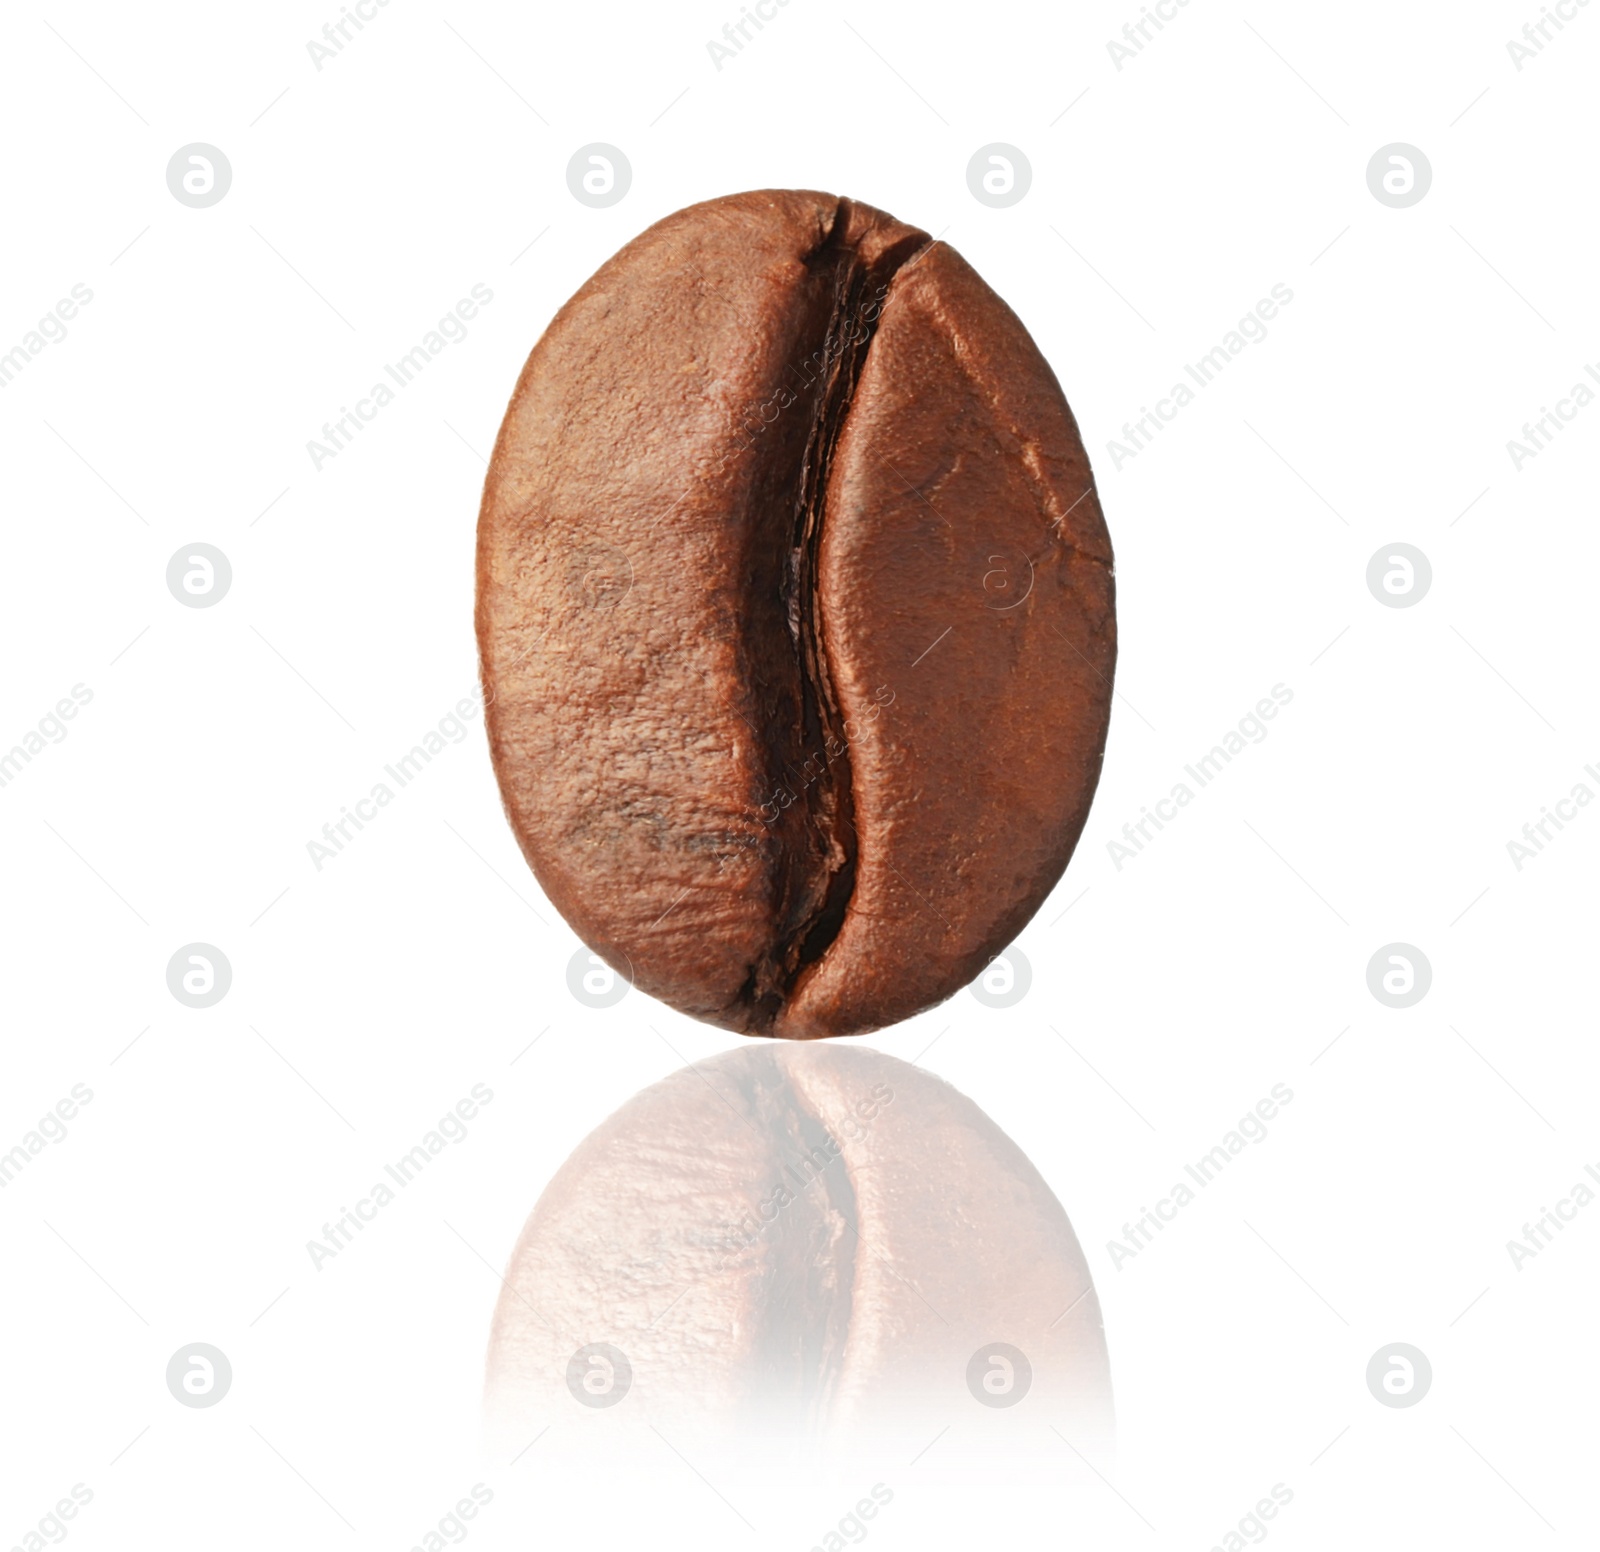 Image of Brown roasted coffee bean on white background 